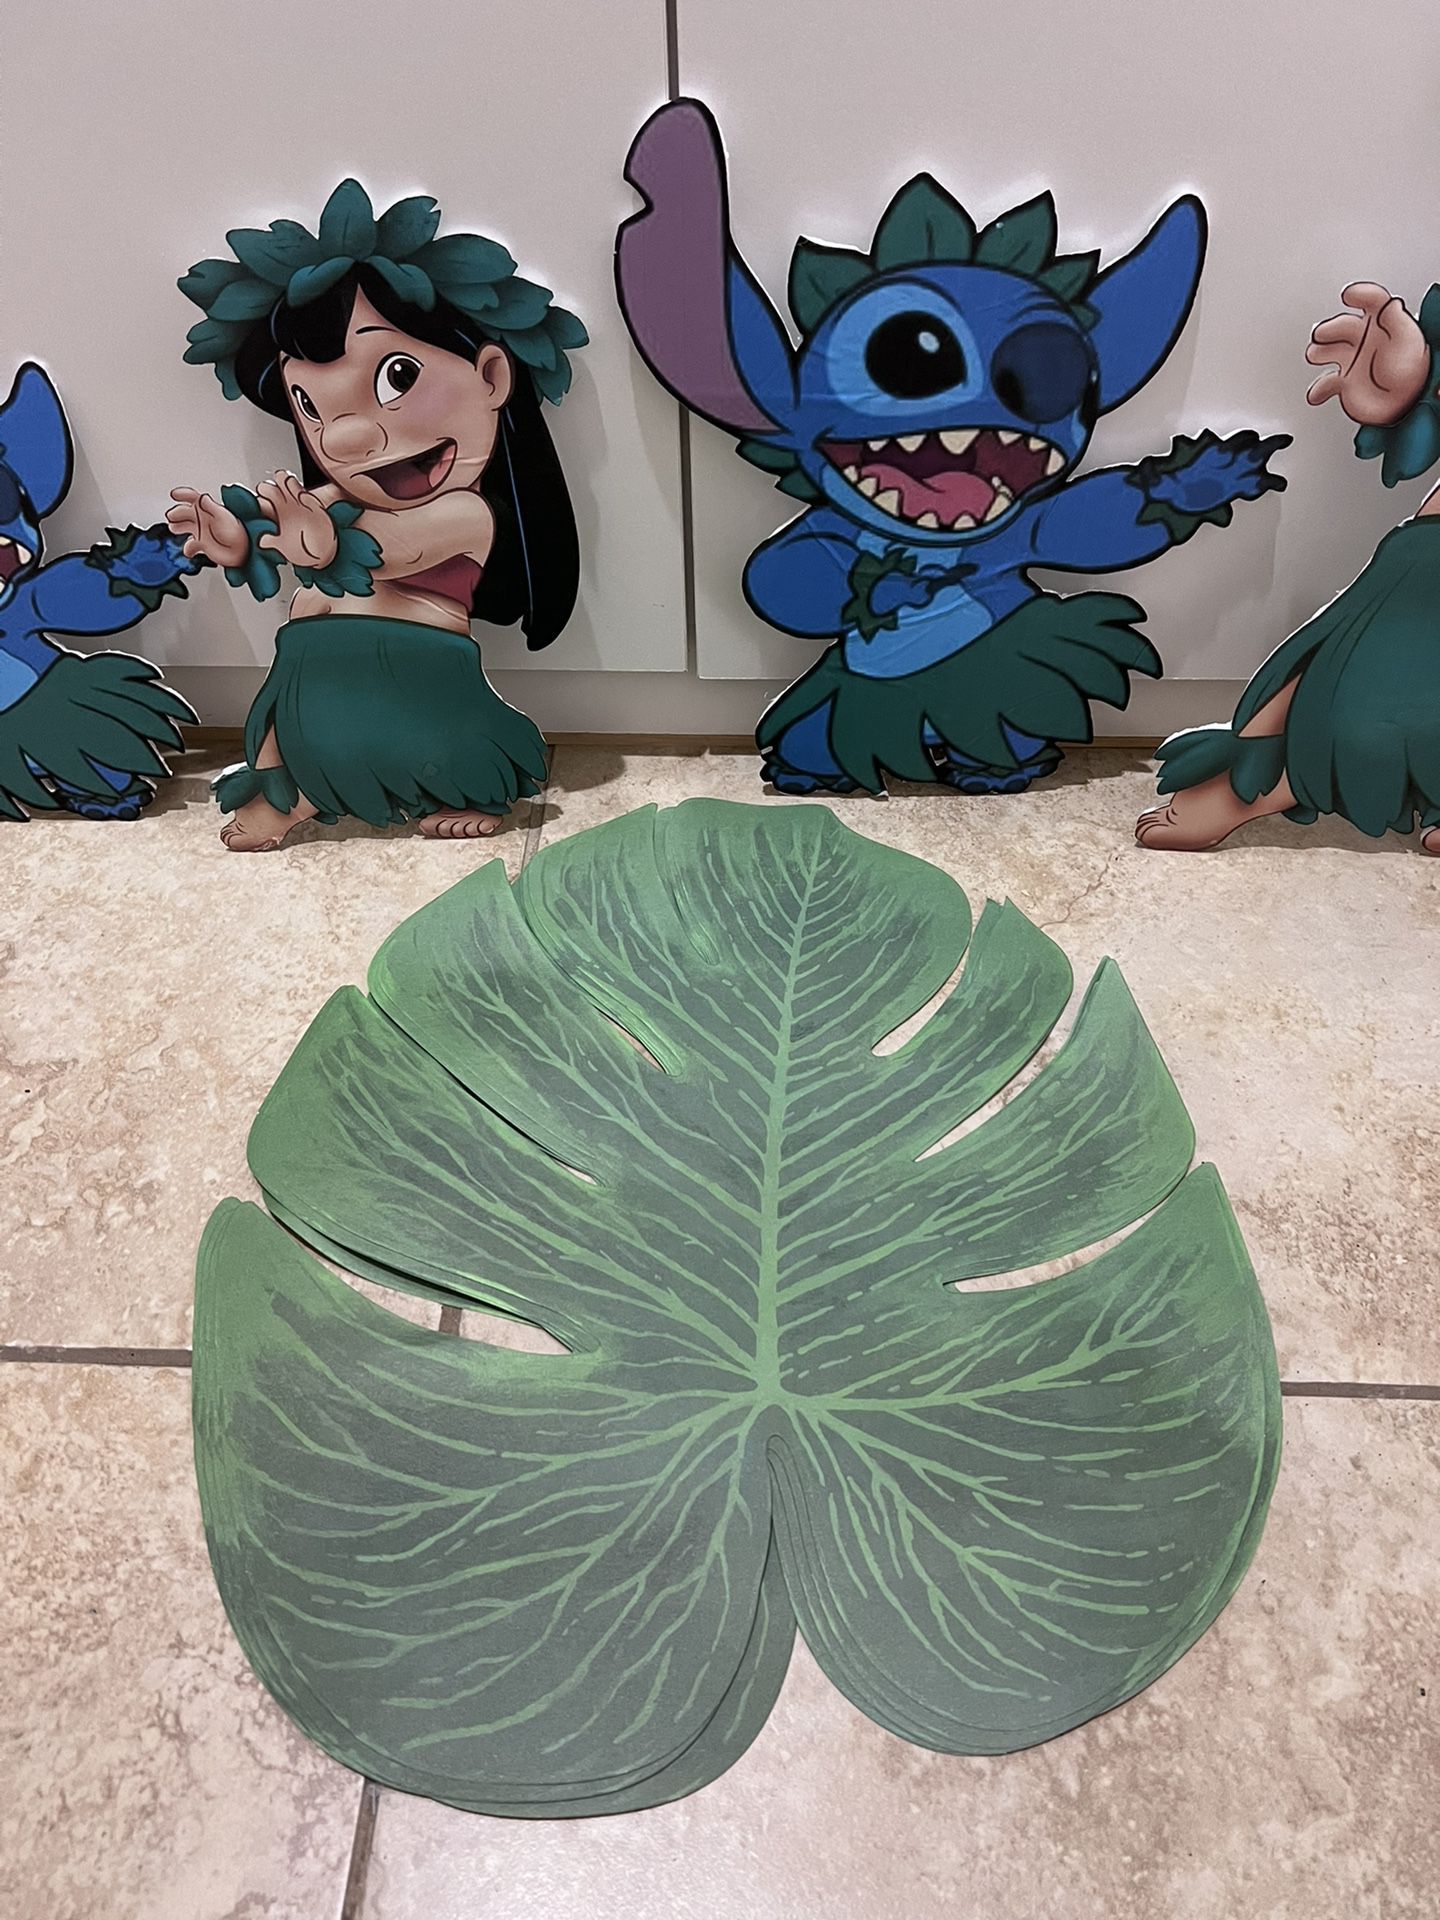 Lilo N Stitch Cupcake Toppers for Sale in El Monte, CA - OfferUp